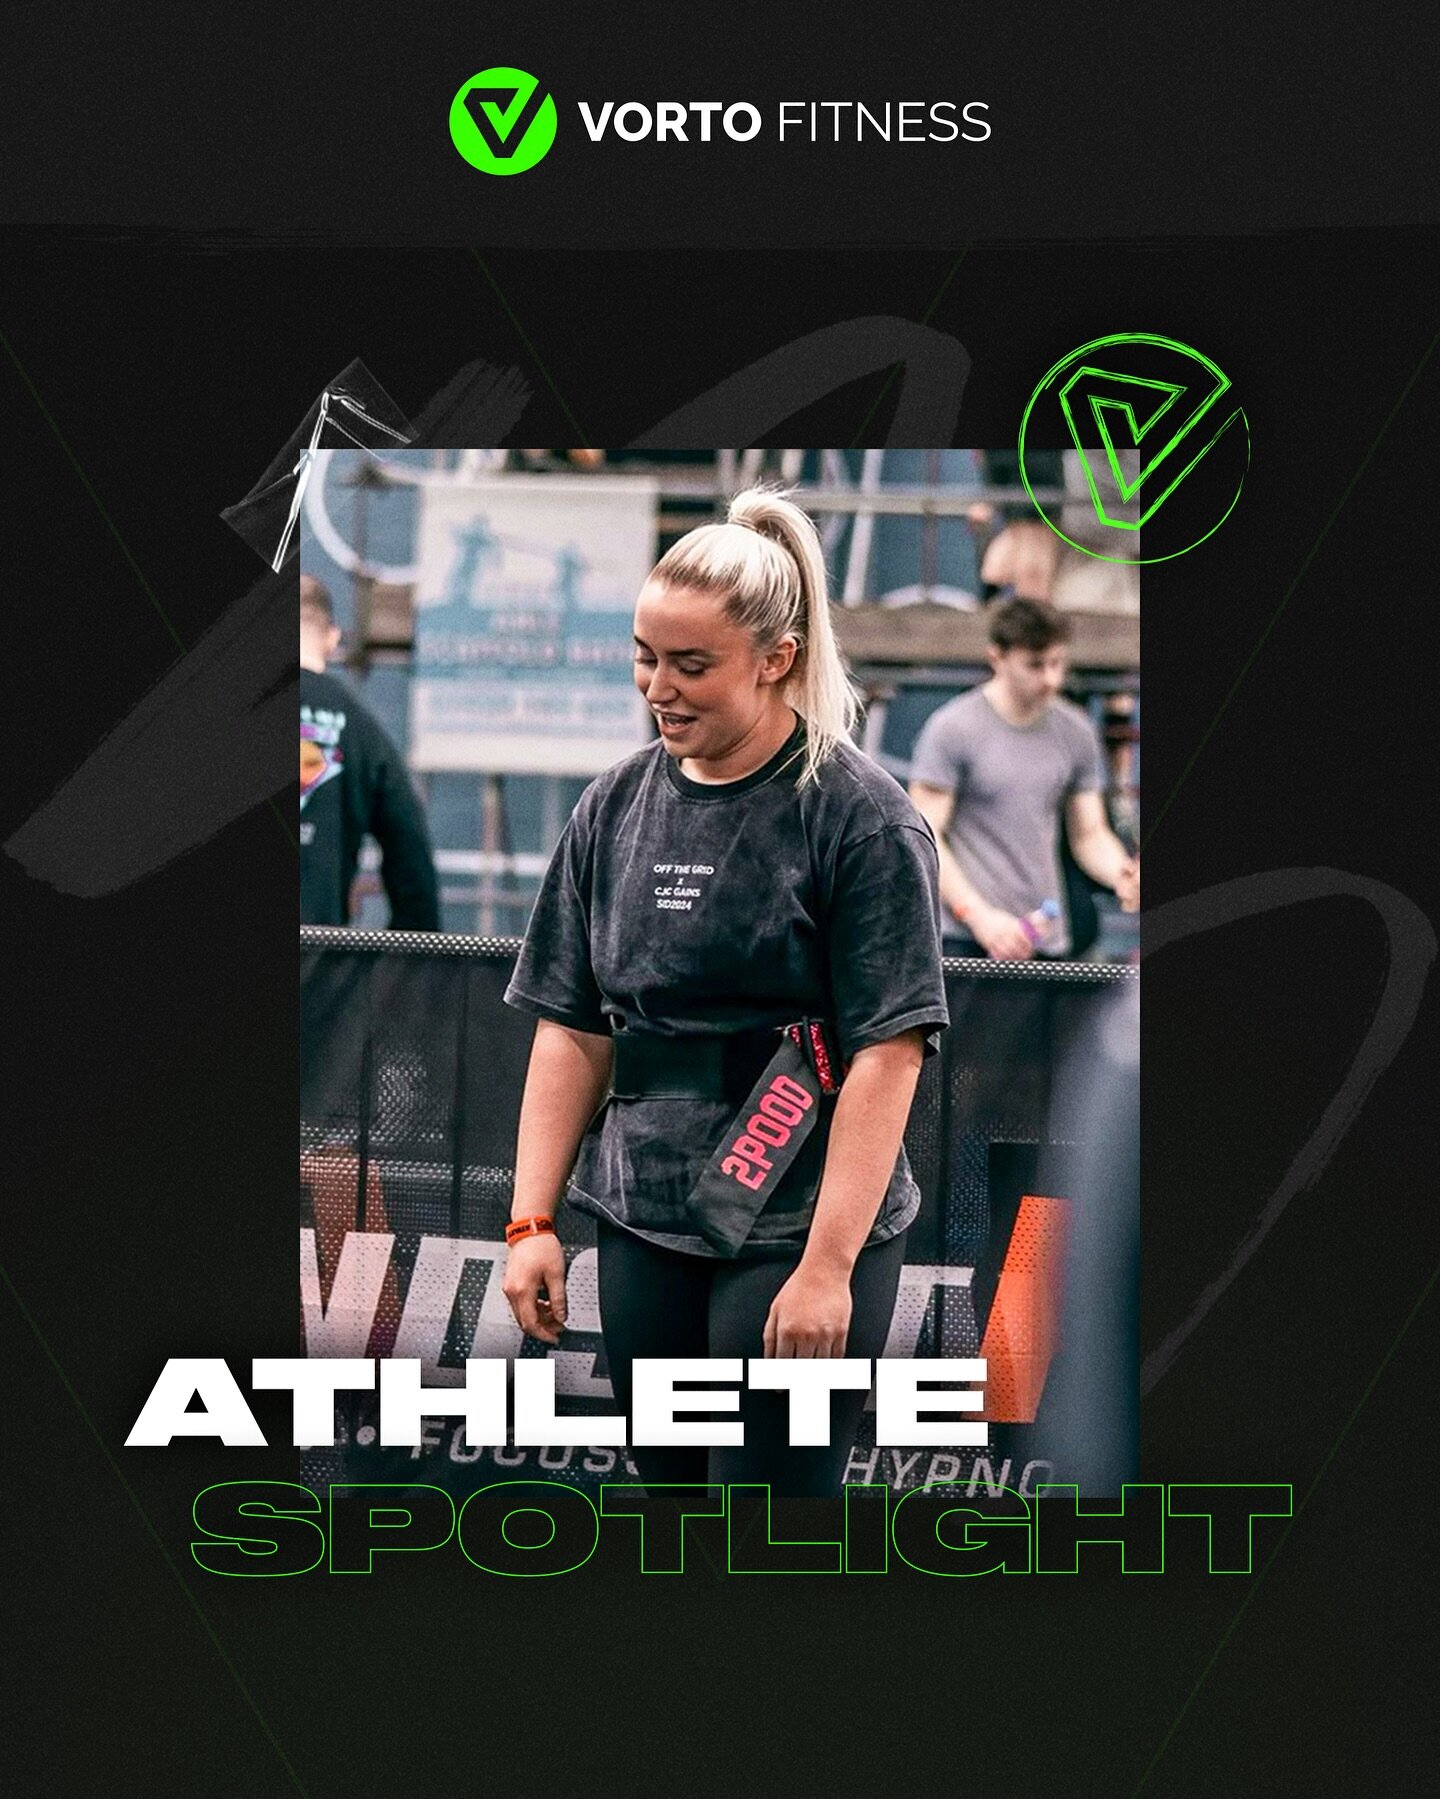 Our March athlete of the month goes out to @chloe_henderson.x 💚.

Chloe has shown what it means to be part of the team, and coming in as one of the newer members, has instantly embraced the change and already settled in as a valued member of @vorto_